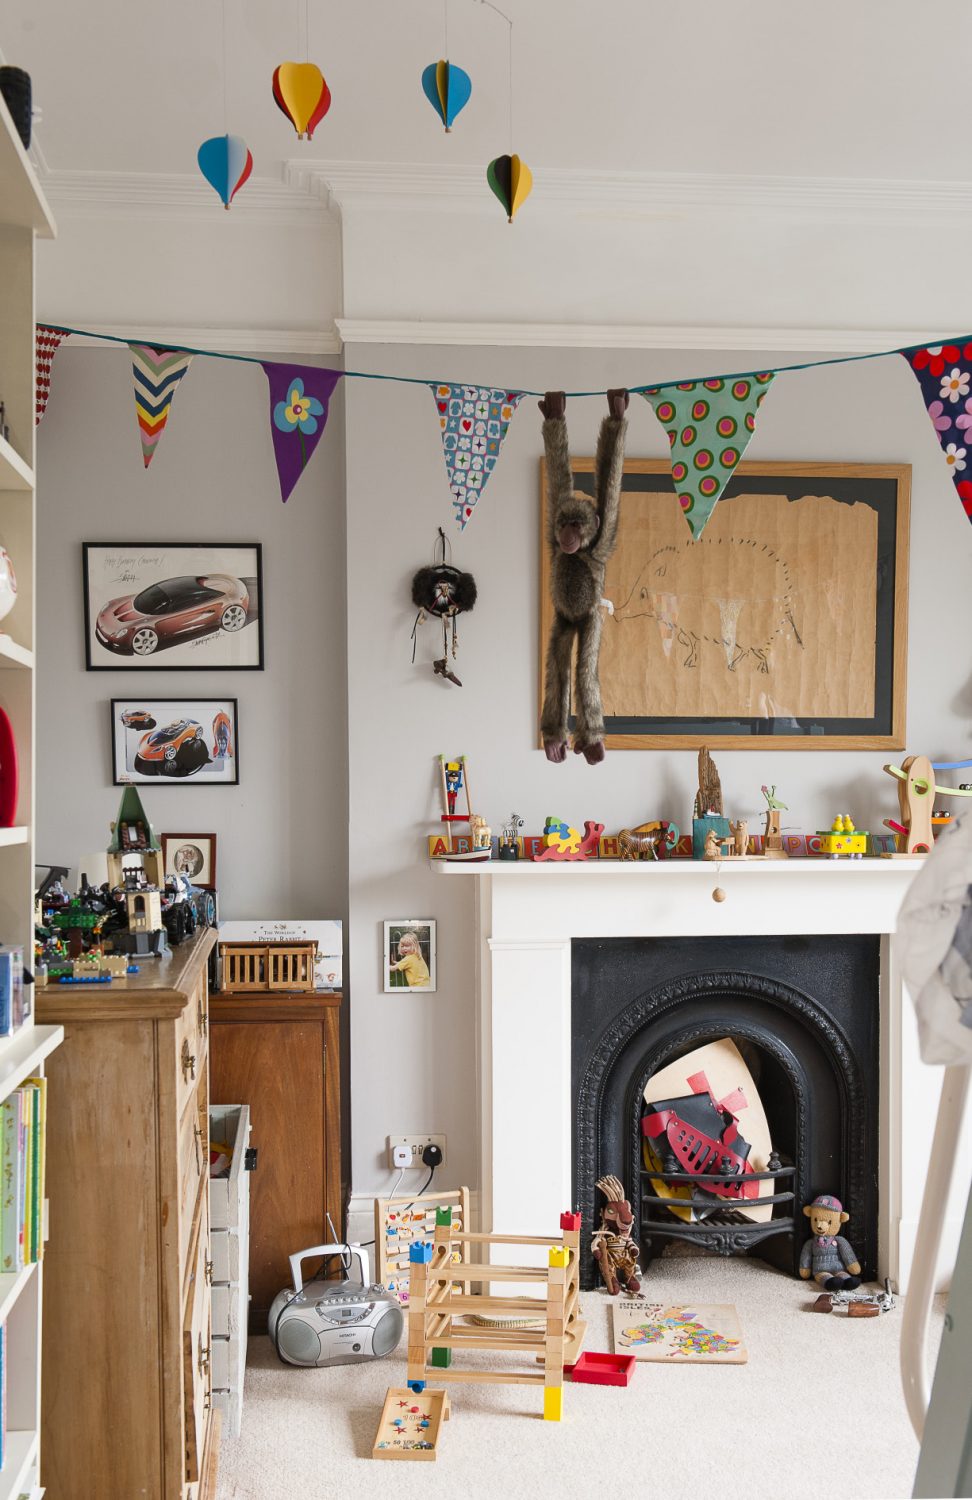 The couple’s children’s rooms were designed by them and reflect their personalities